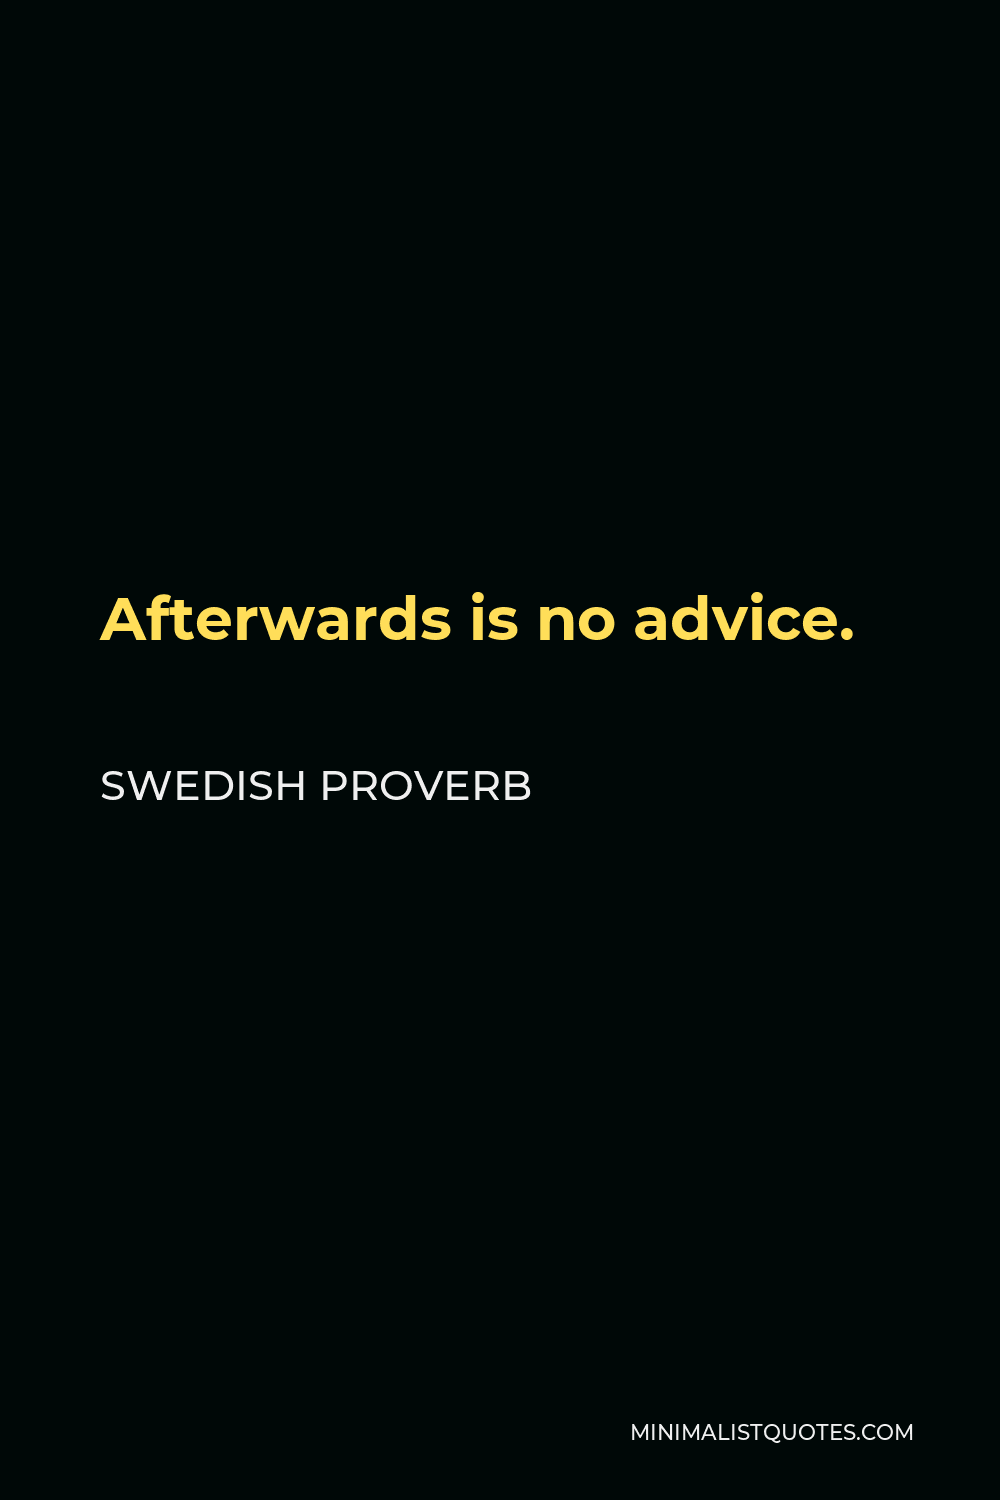 Swedish Proverb Quote - Afterwards is no advice.